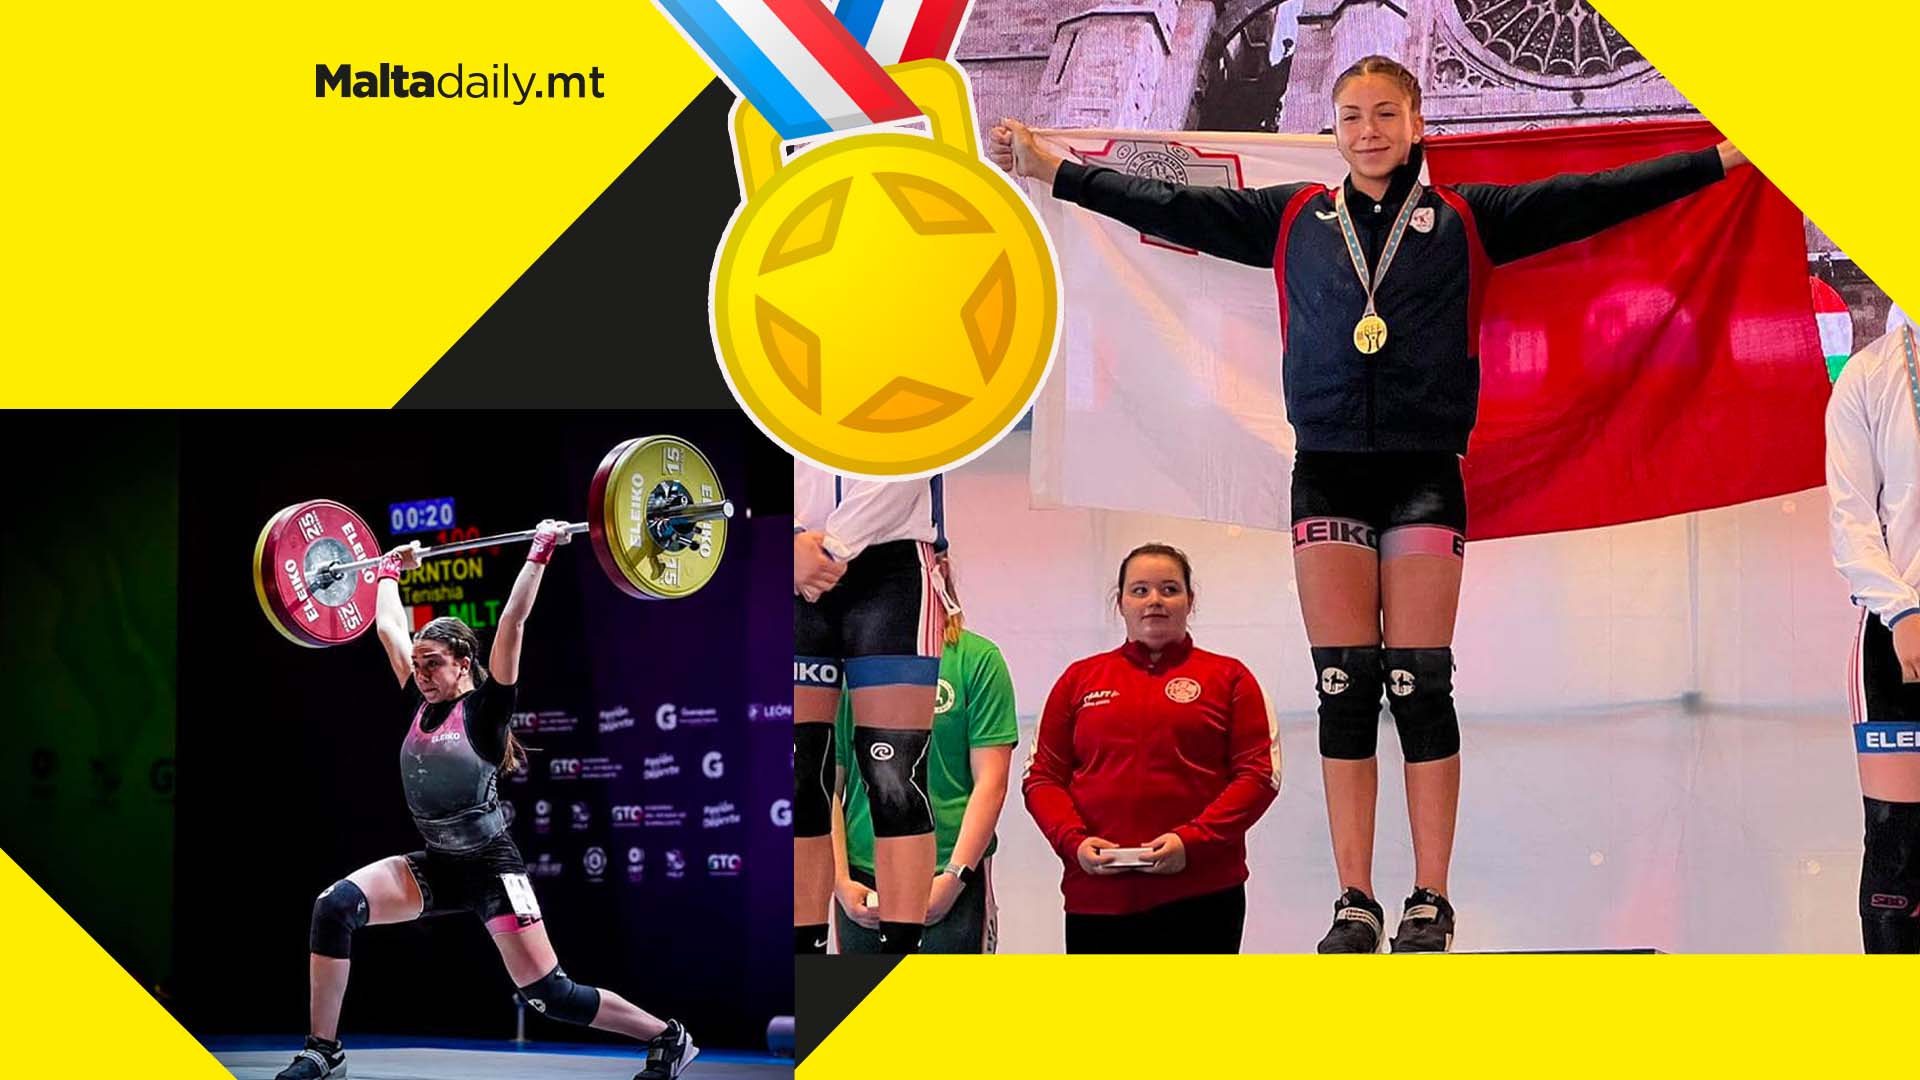 Local weightlifter Tenishia Thornton wins gold at European Union Cup